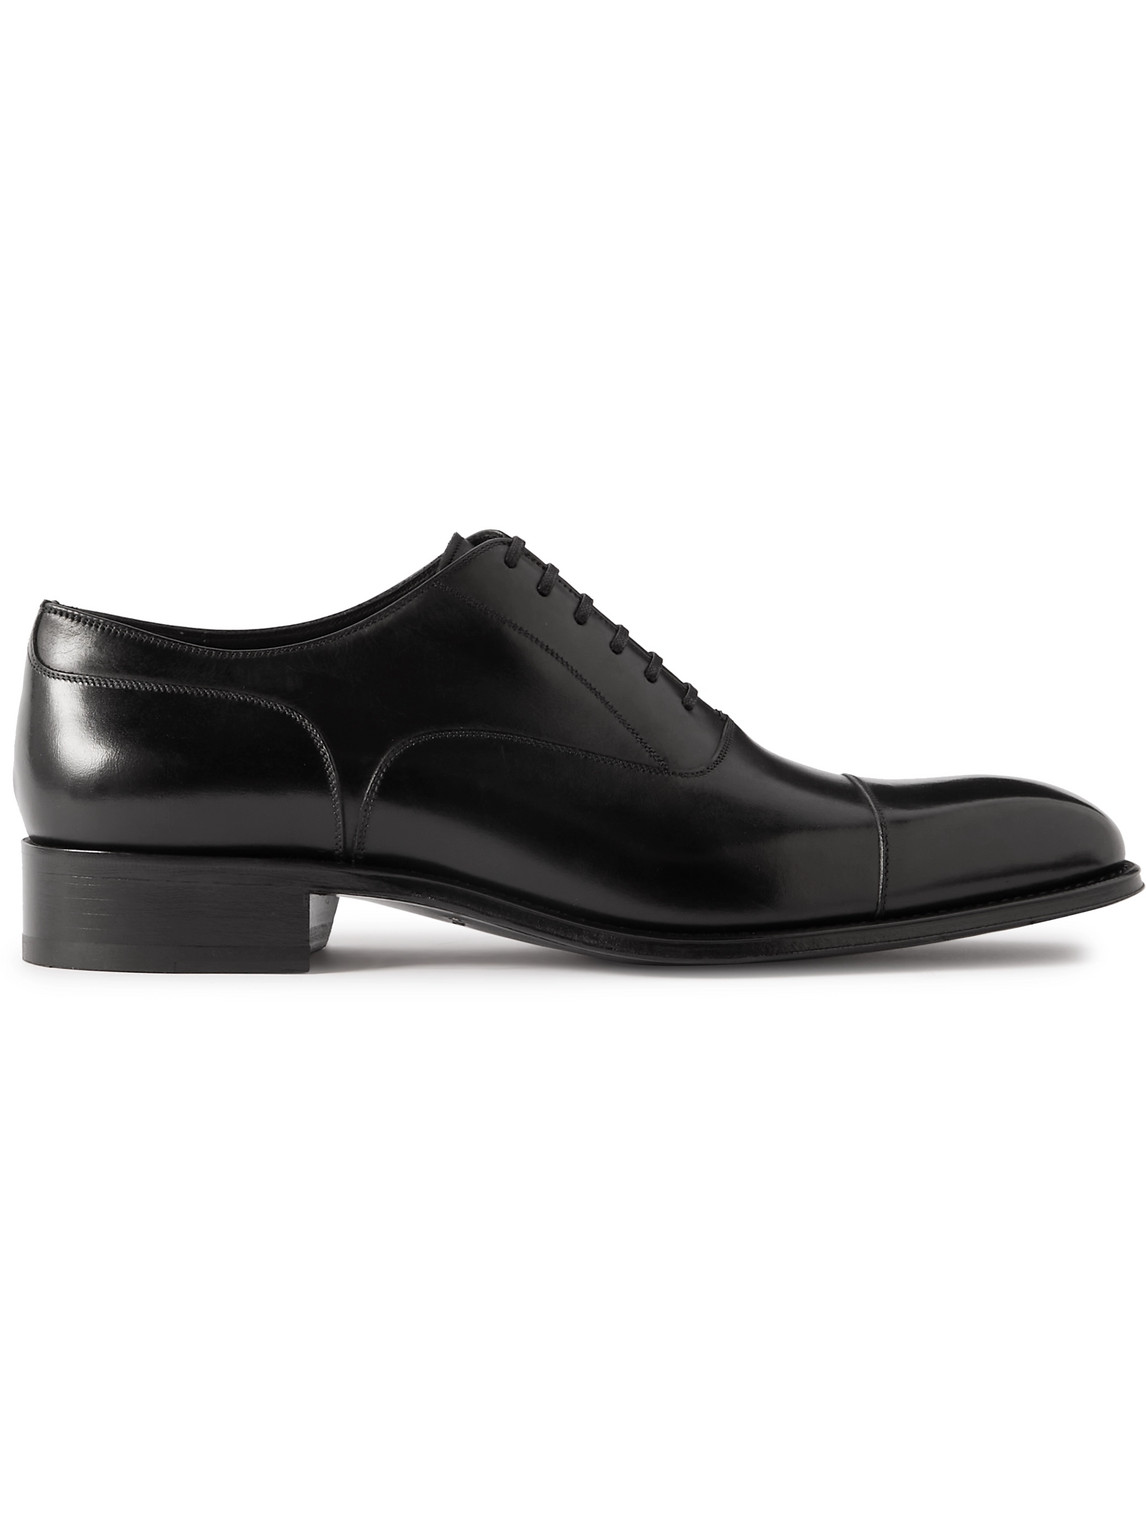 TOM FORD CAYDON BURNISHED-LEATHER OXFORD SHOES